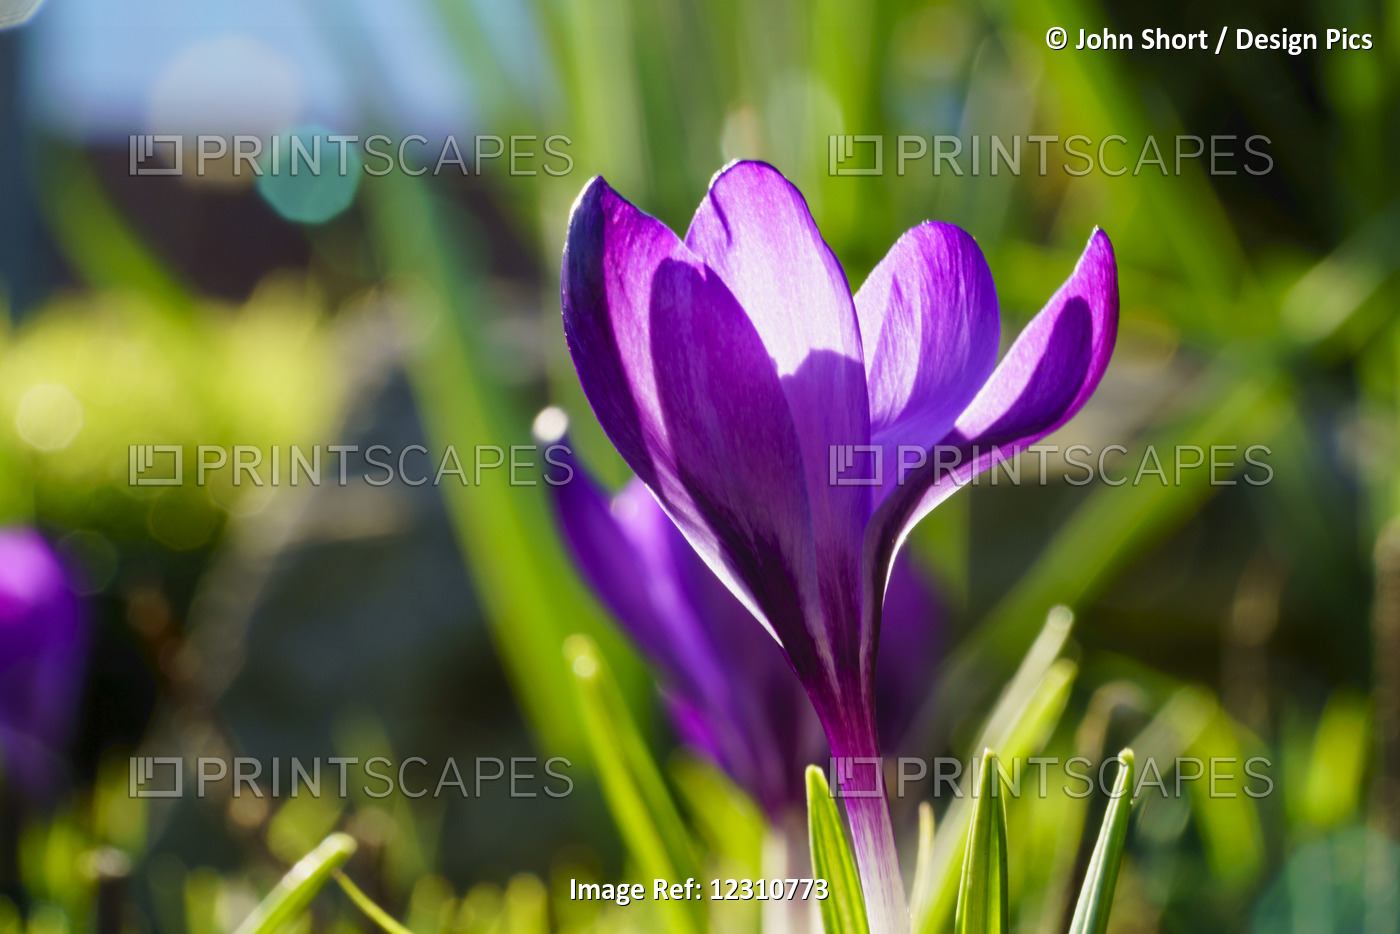 A Purple Crocus In Bloom; South Shields, Tyne And Wear, England